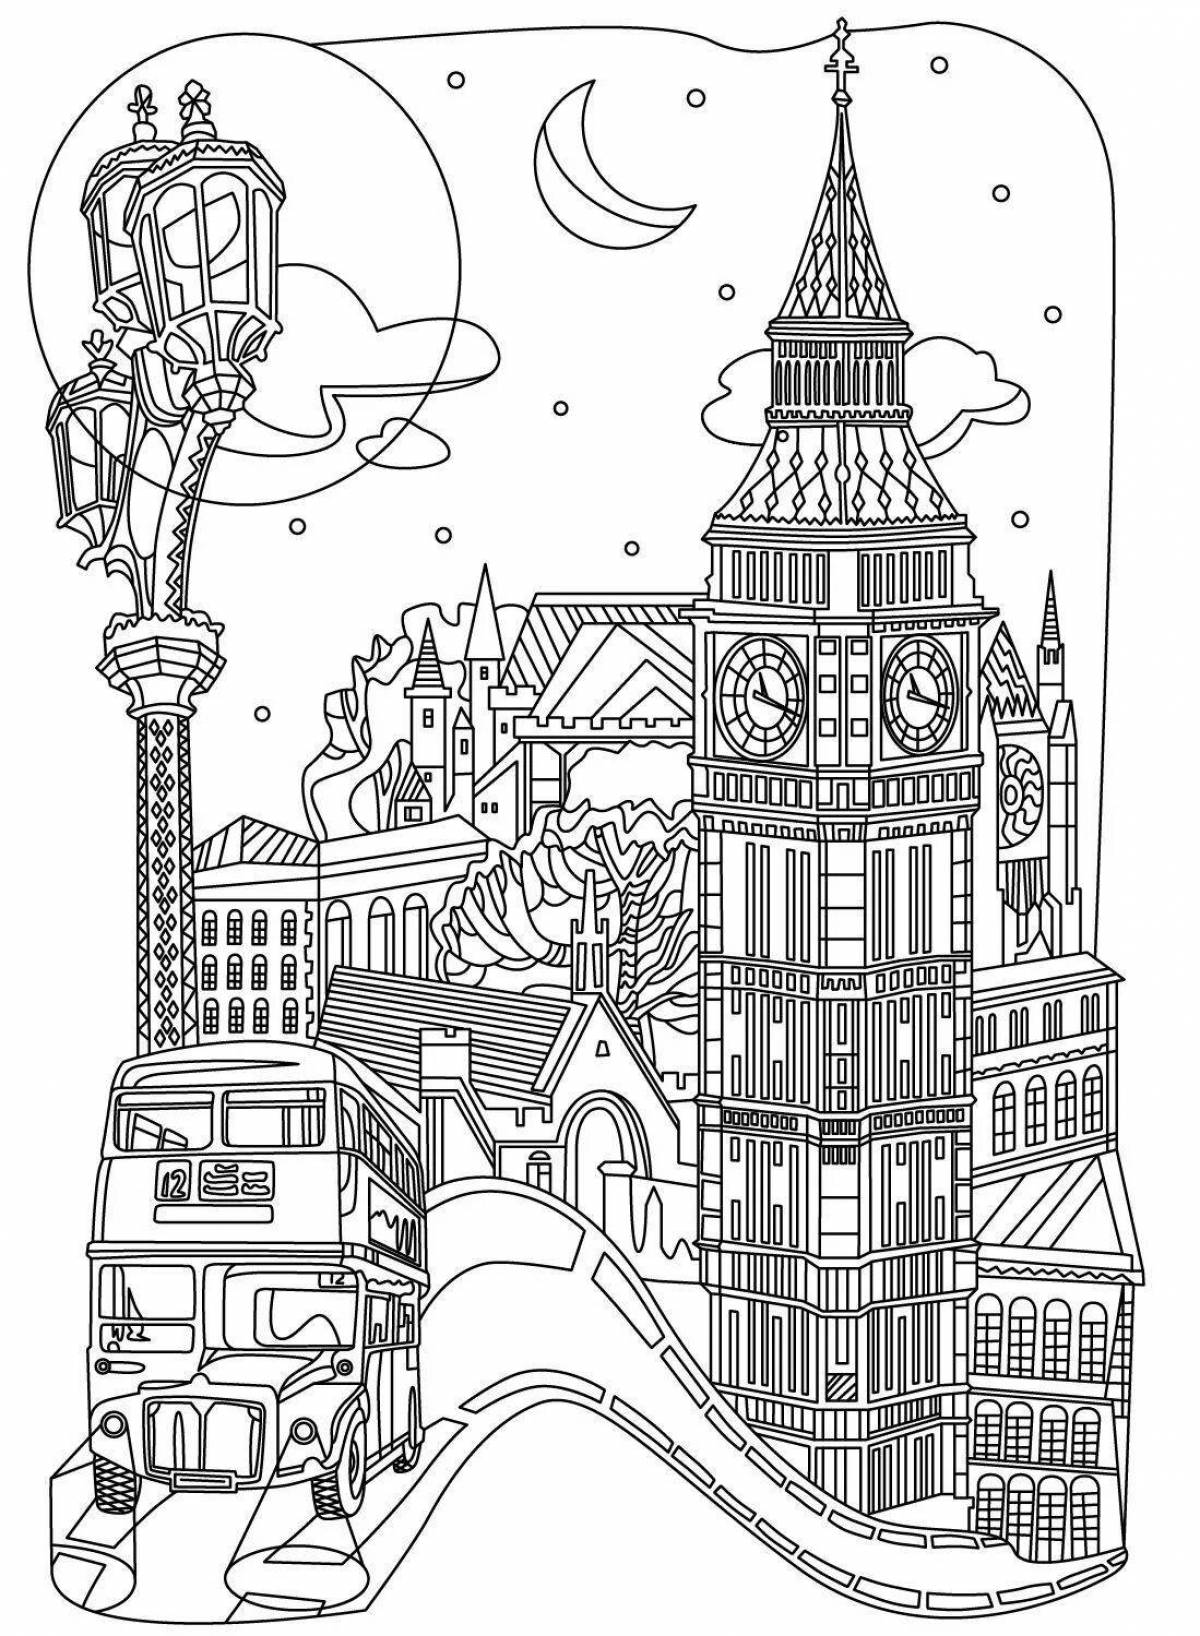 Charming complex city coloring book